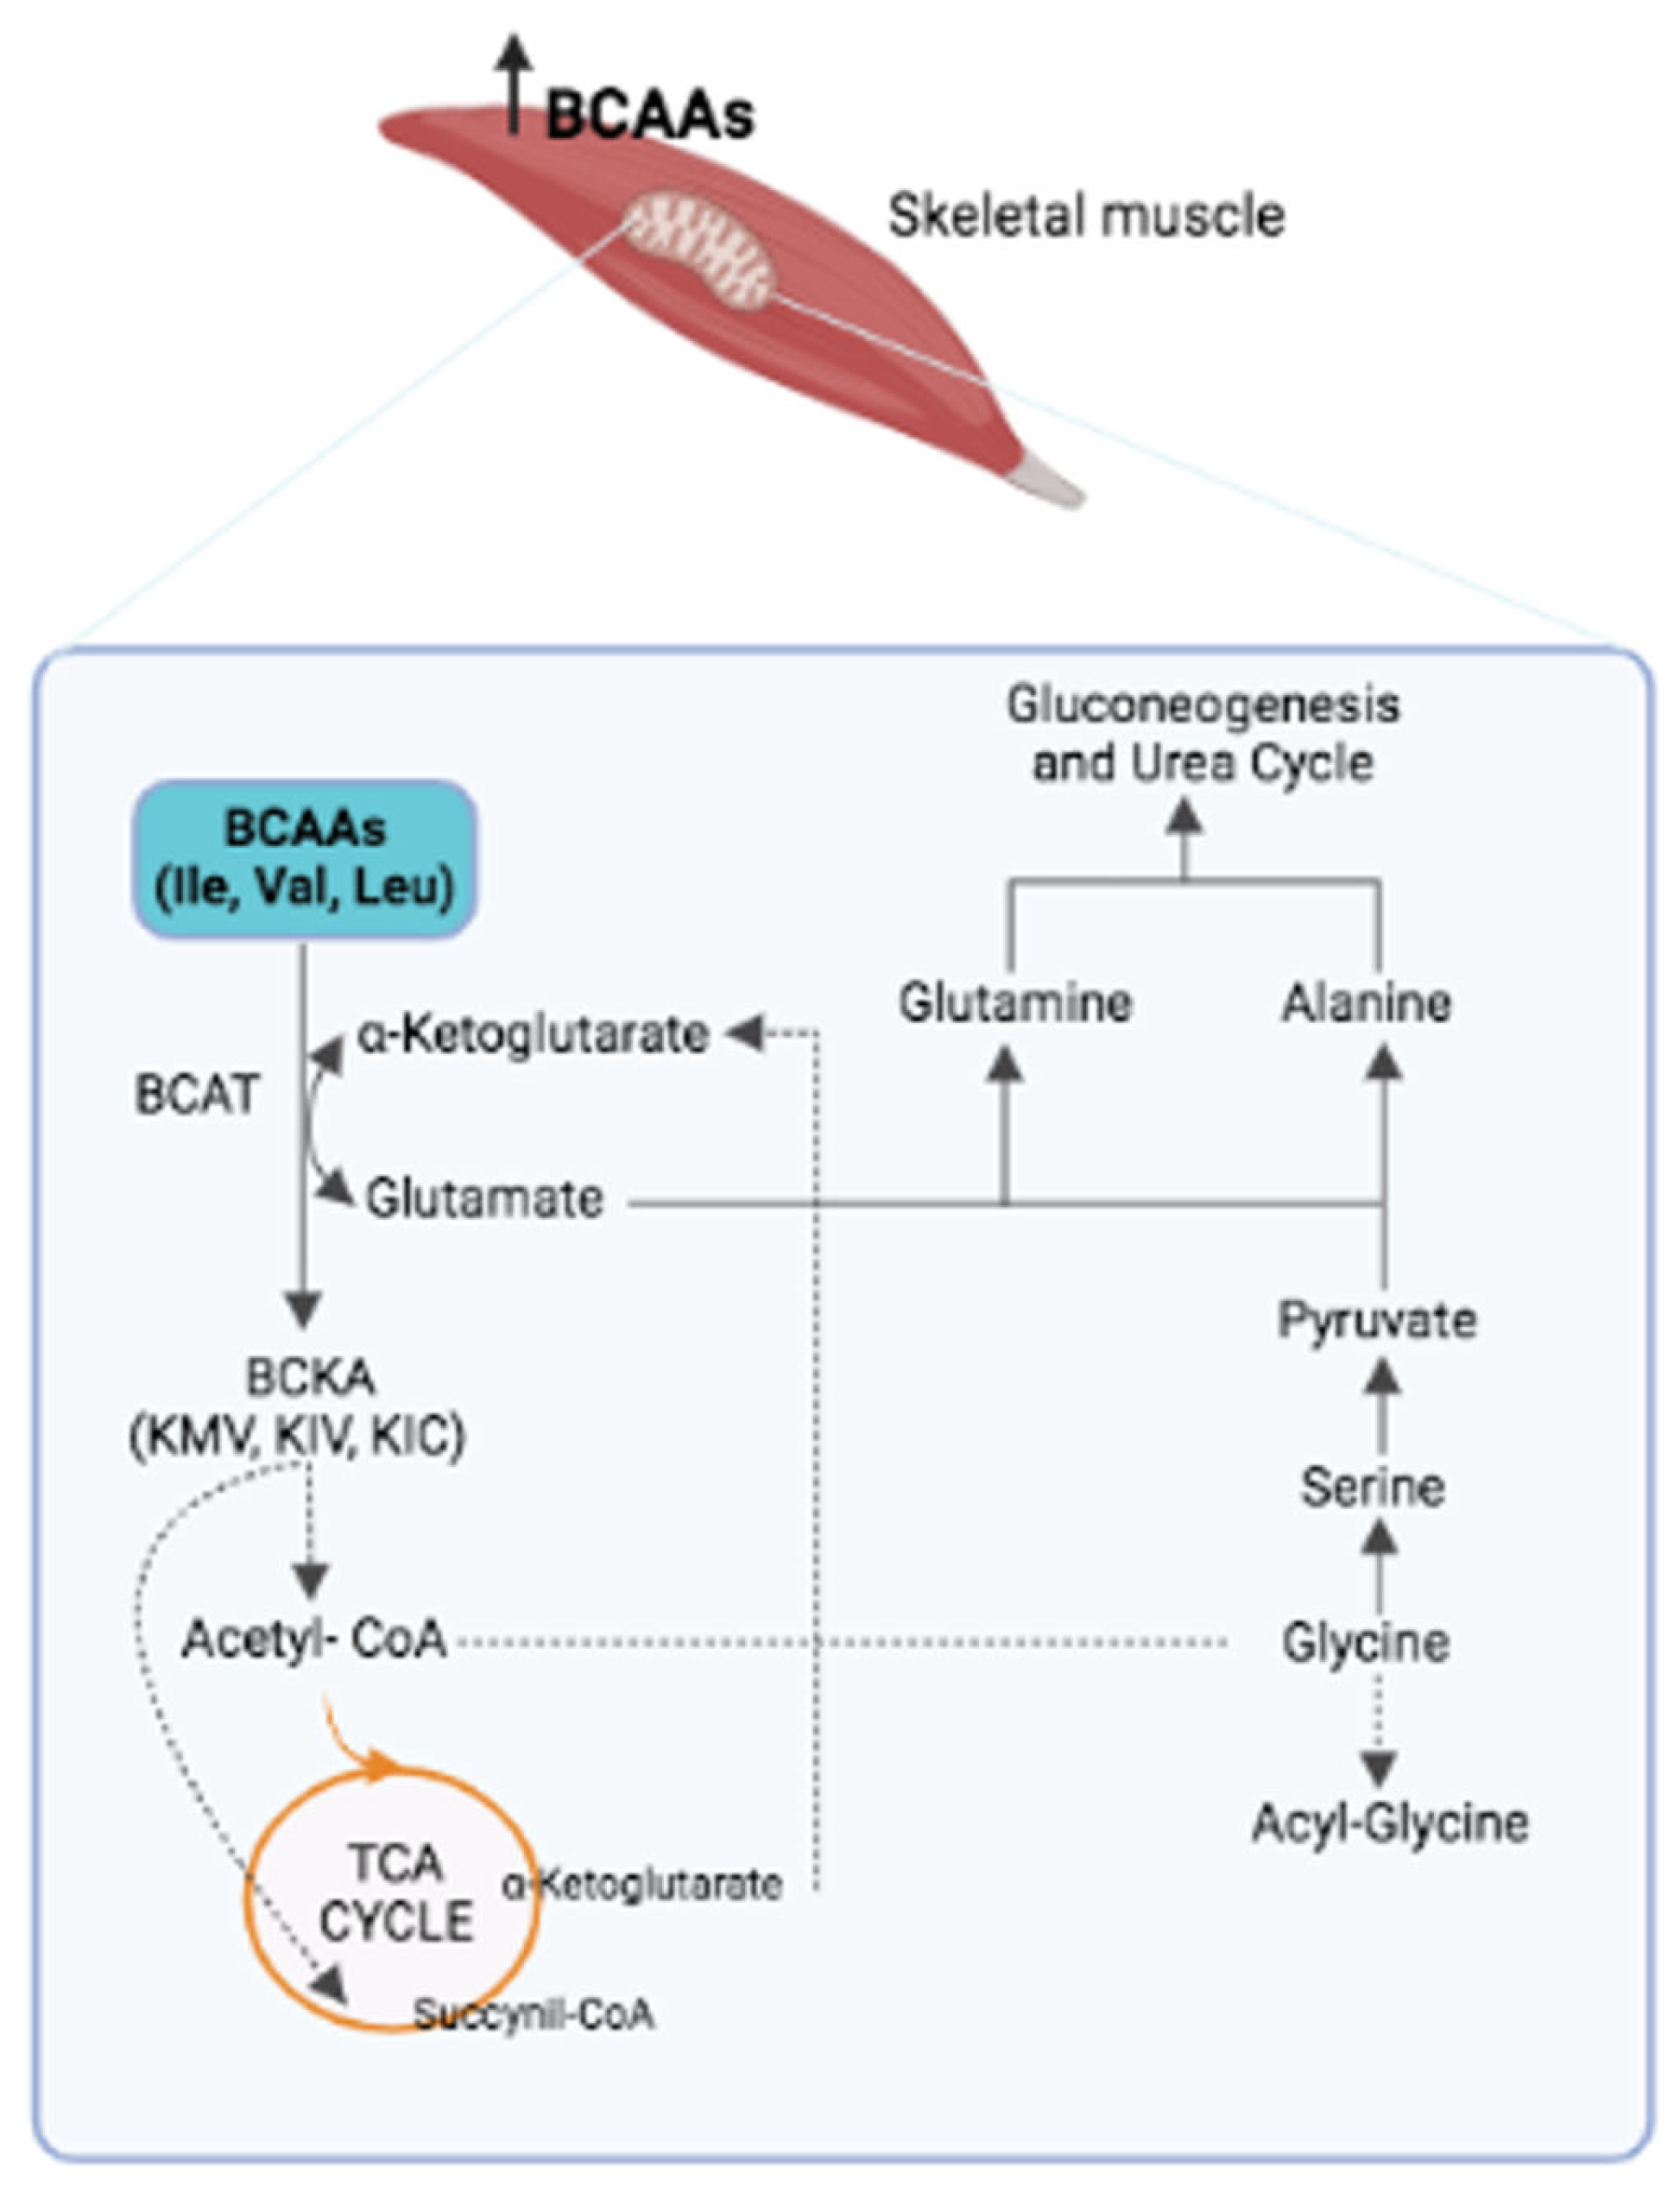 BCAA and muscle inflammation